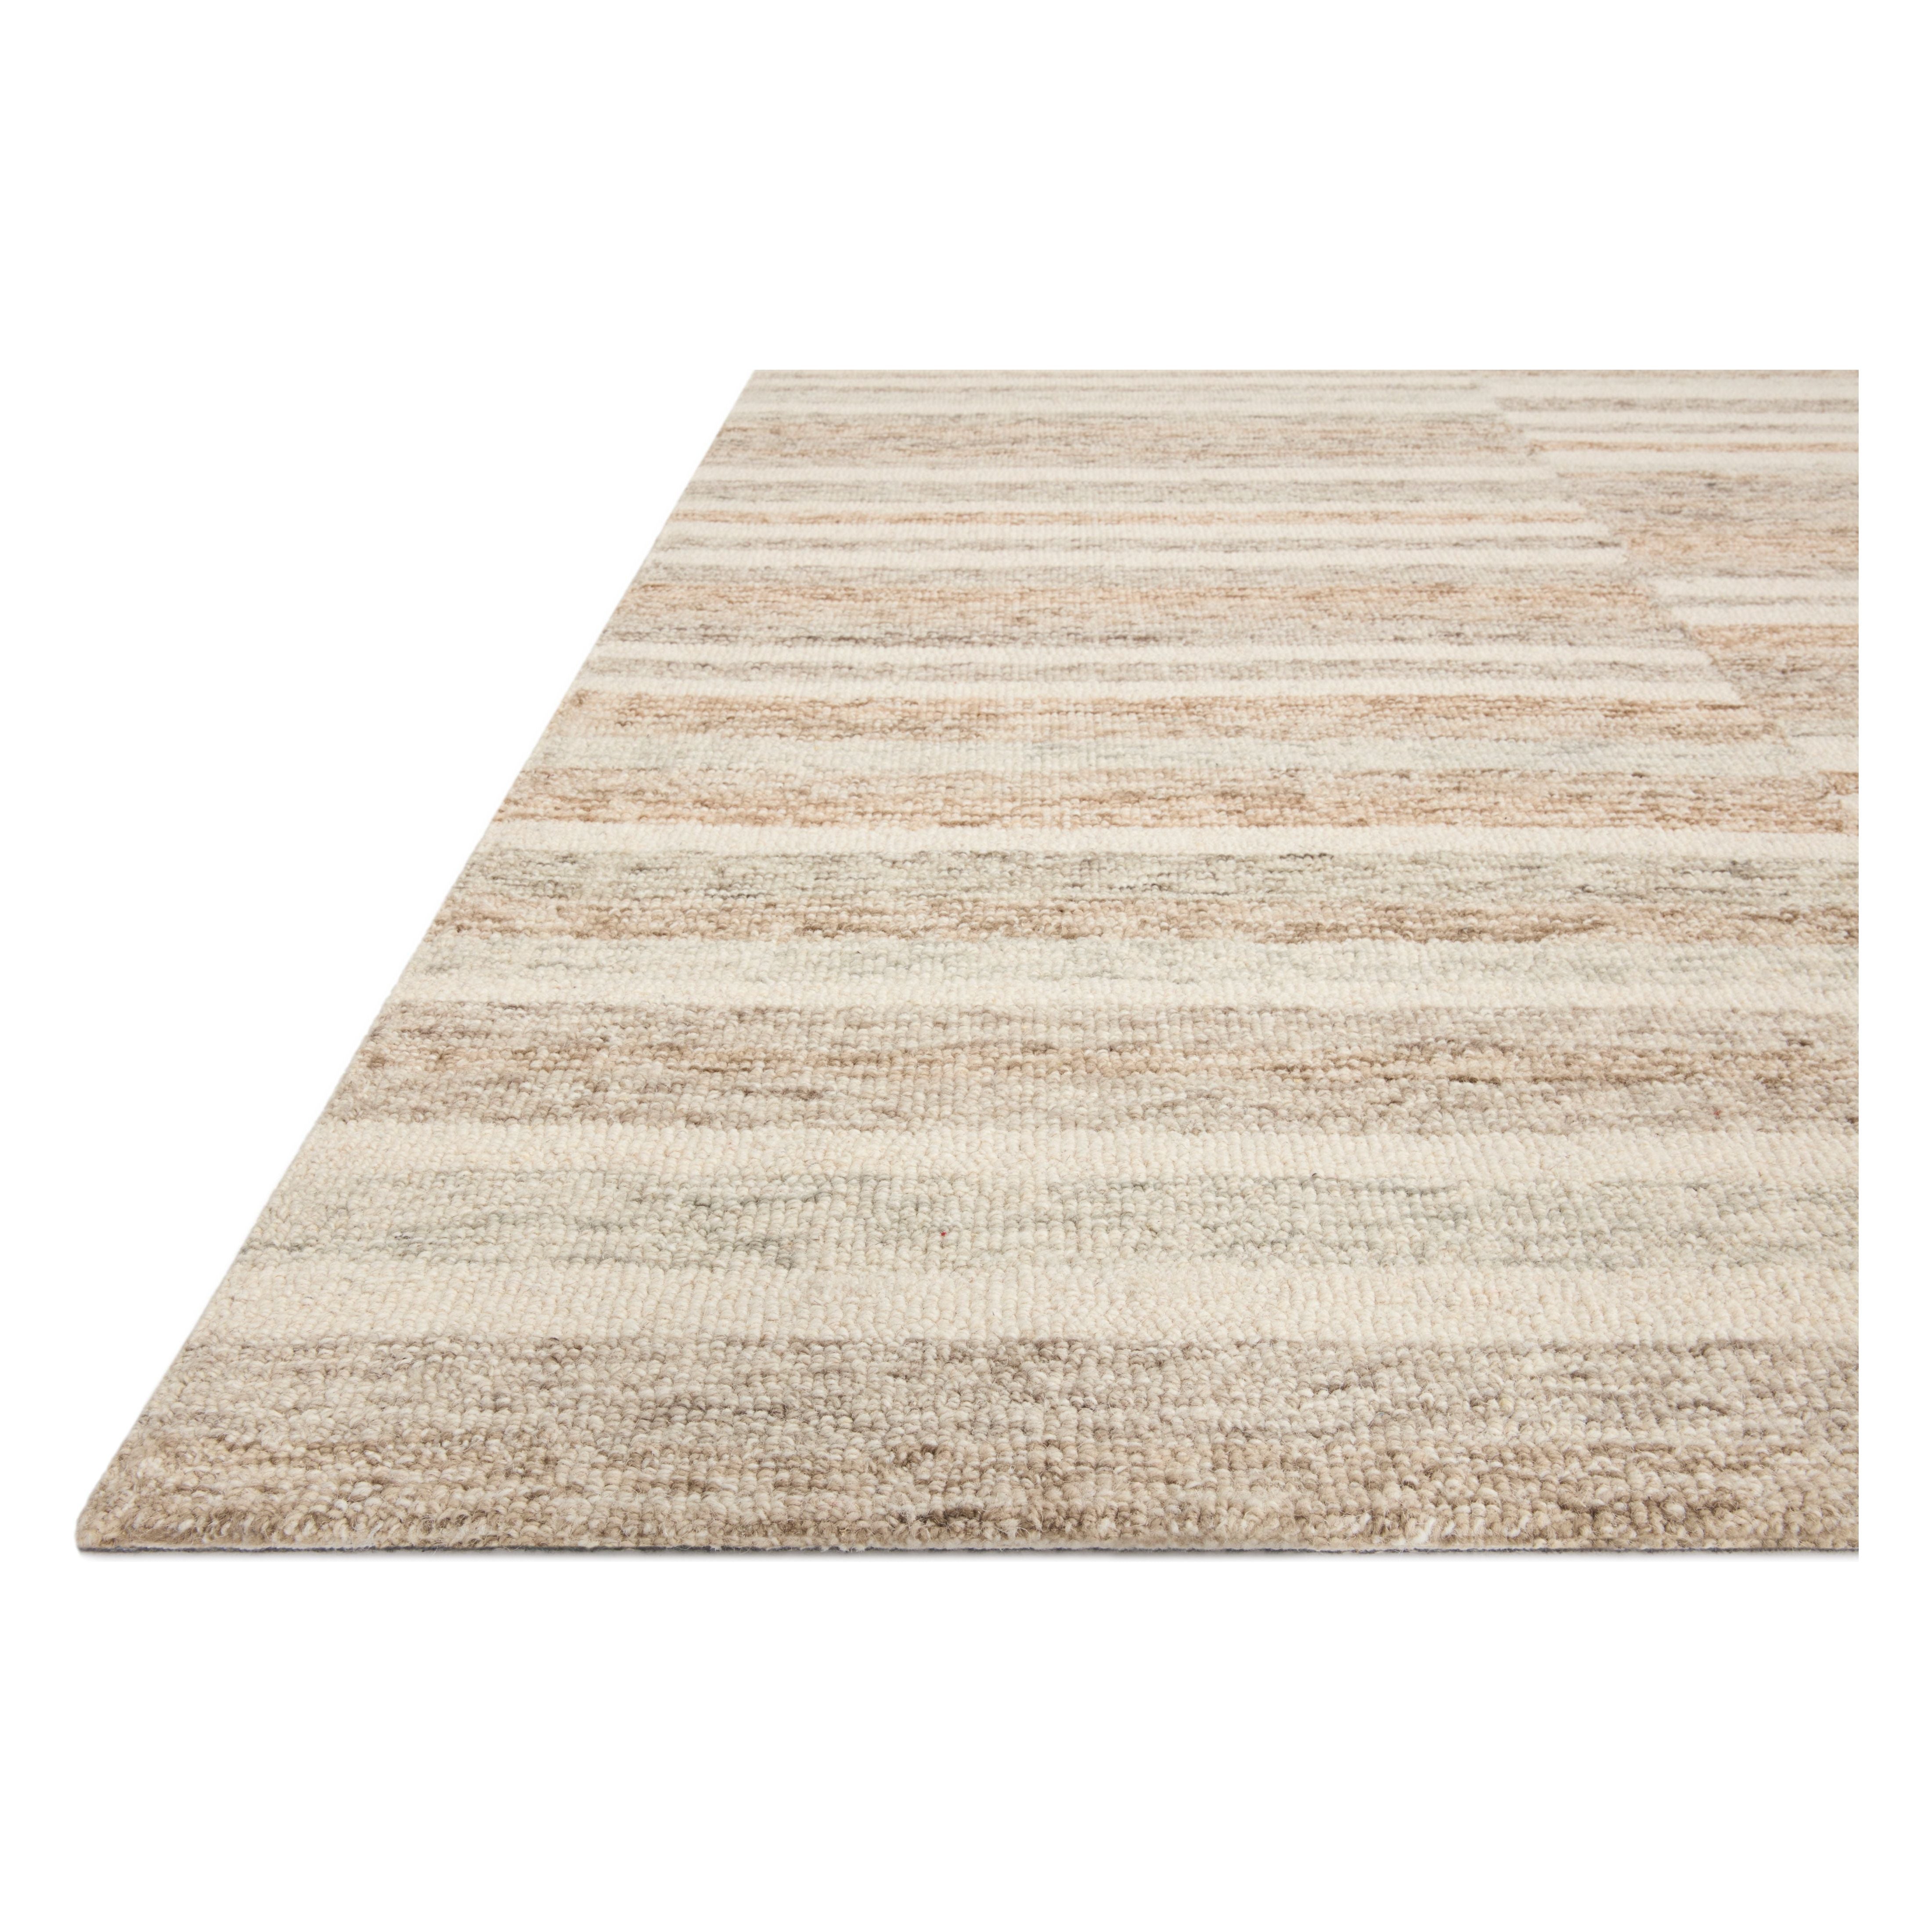 The subtle, warm tonal patterns remind us of our favorite California cool hemp rugs. Known for its durability, the Chris Ivory / Clay hooked wool rug is a smart choice for any room in your home that gets lots of love. Amethyst Home provides interior design services, furniture, rugs, and lighting in the Seattle metro area.